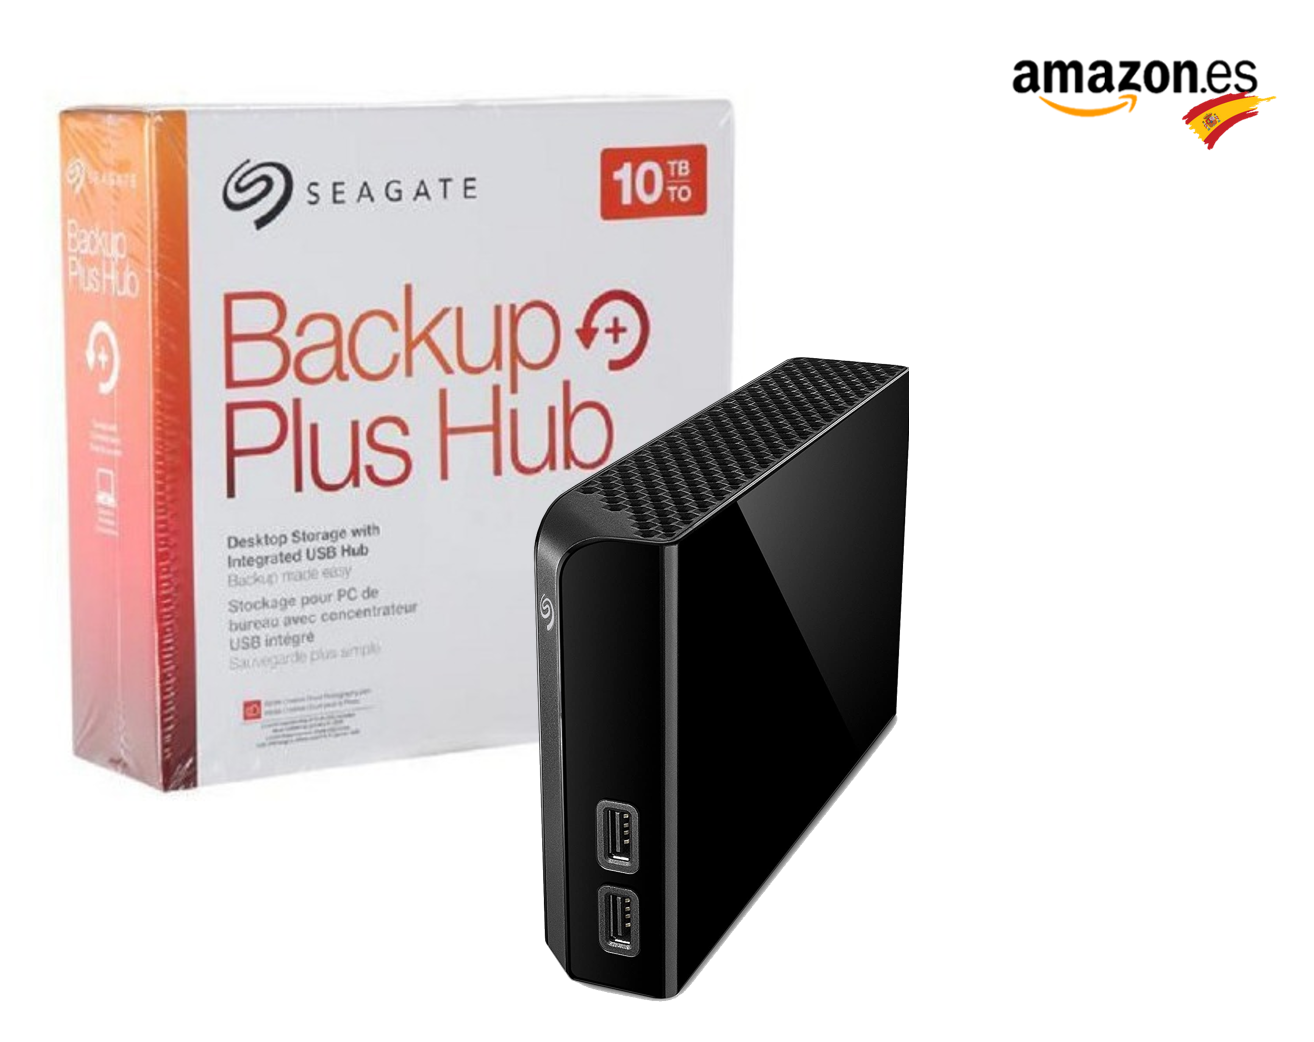 reformat seagate backup plus so it plays on tv